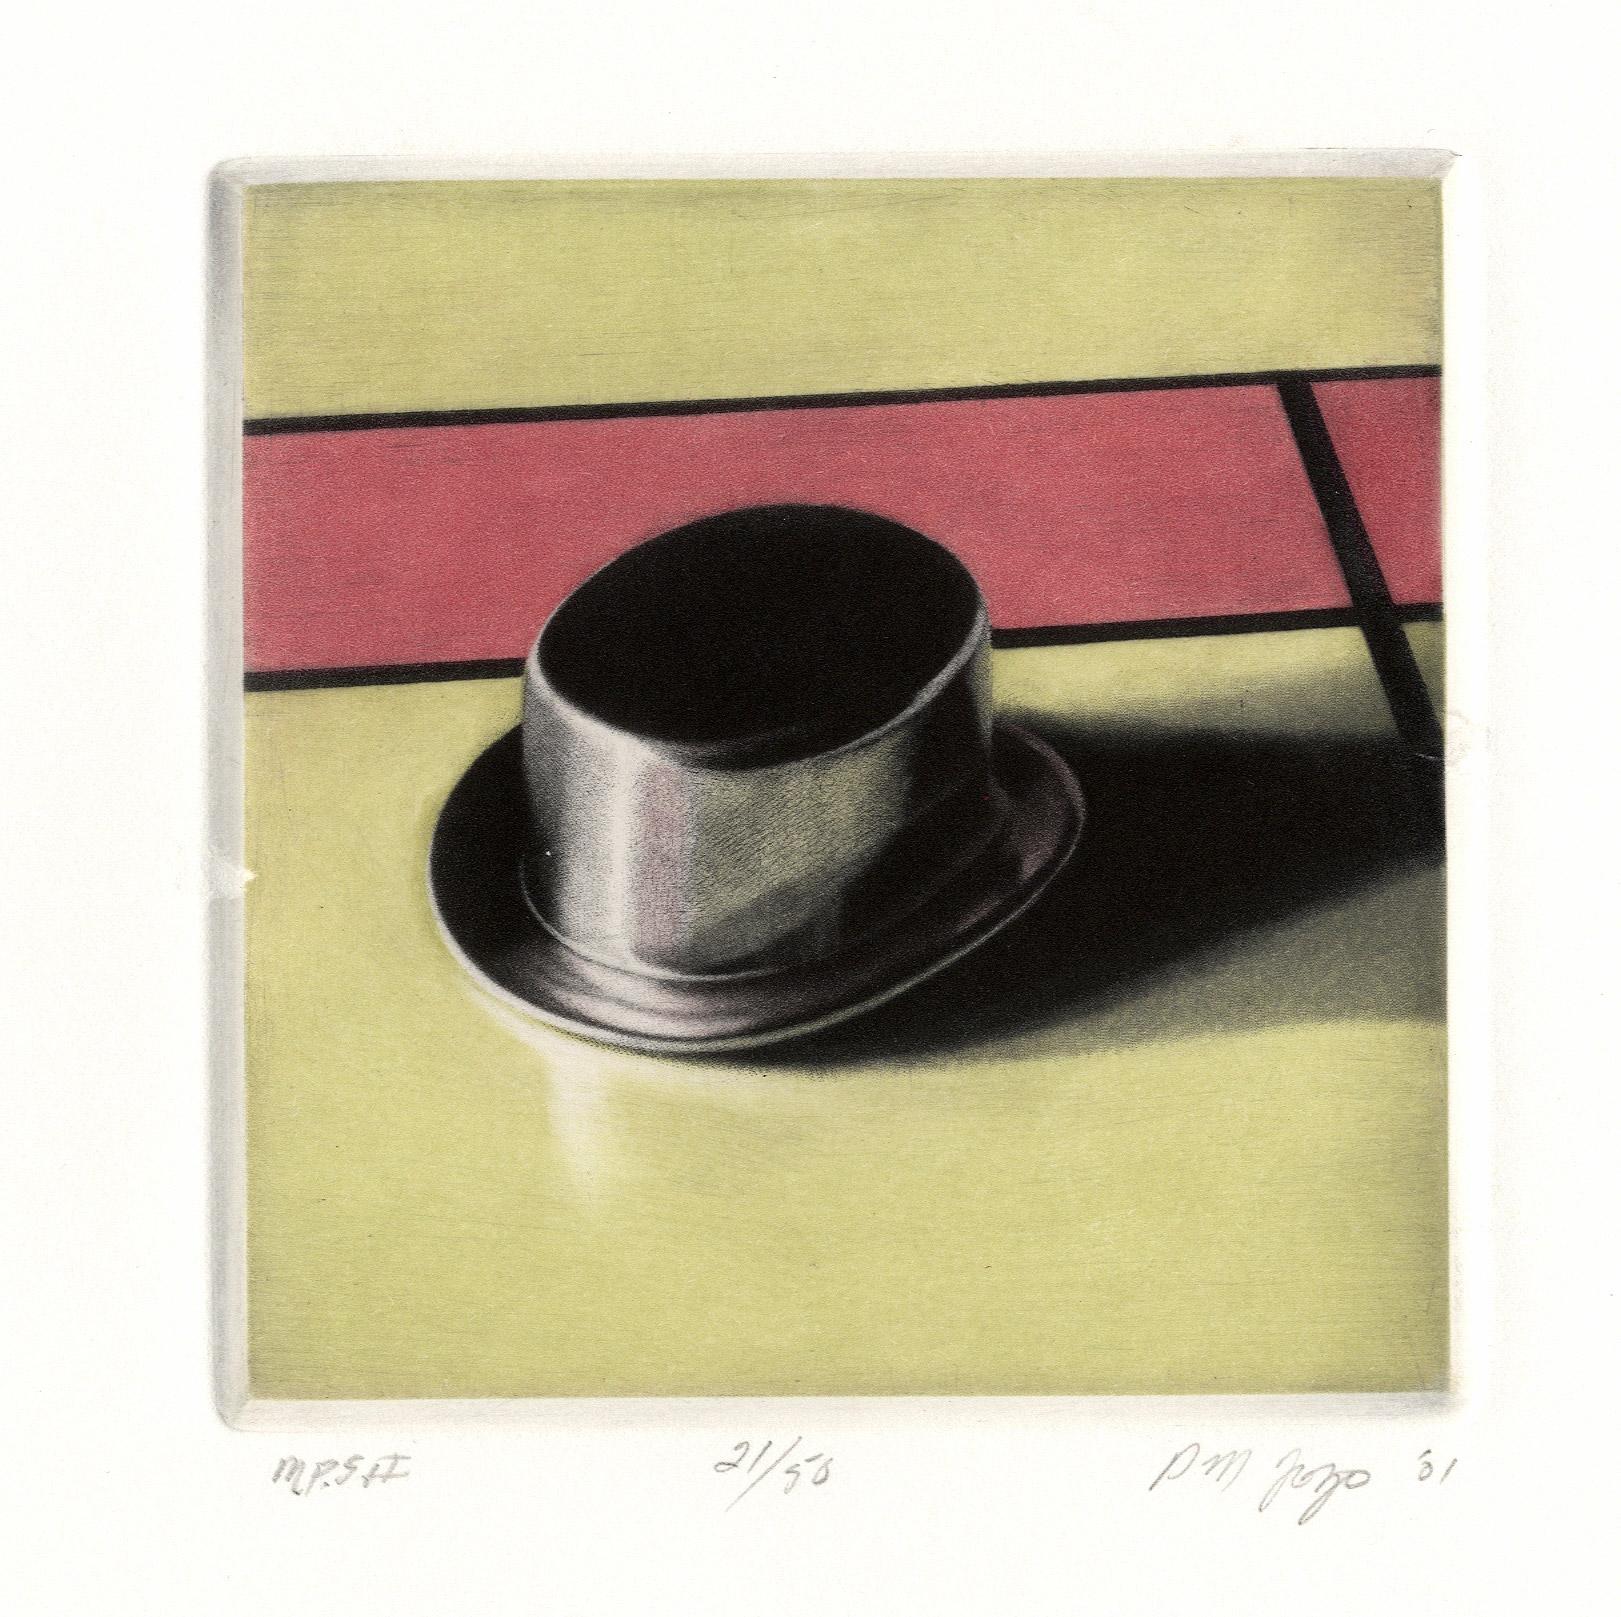 Monopoly Set II (Was the Top Hat your favorite piece?) - Beige Still-Life Print by Peter Jogo